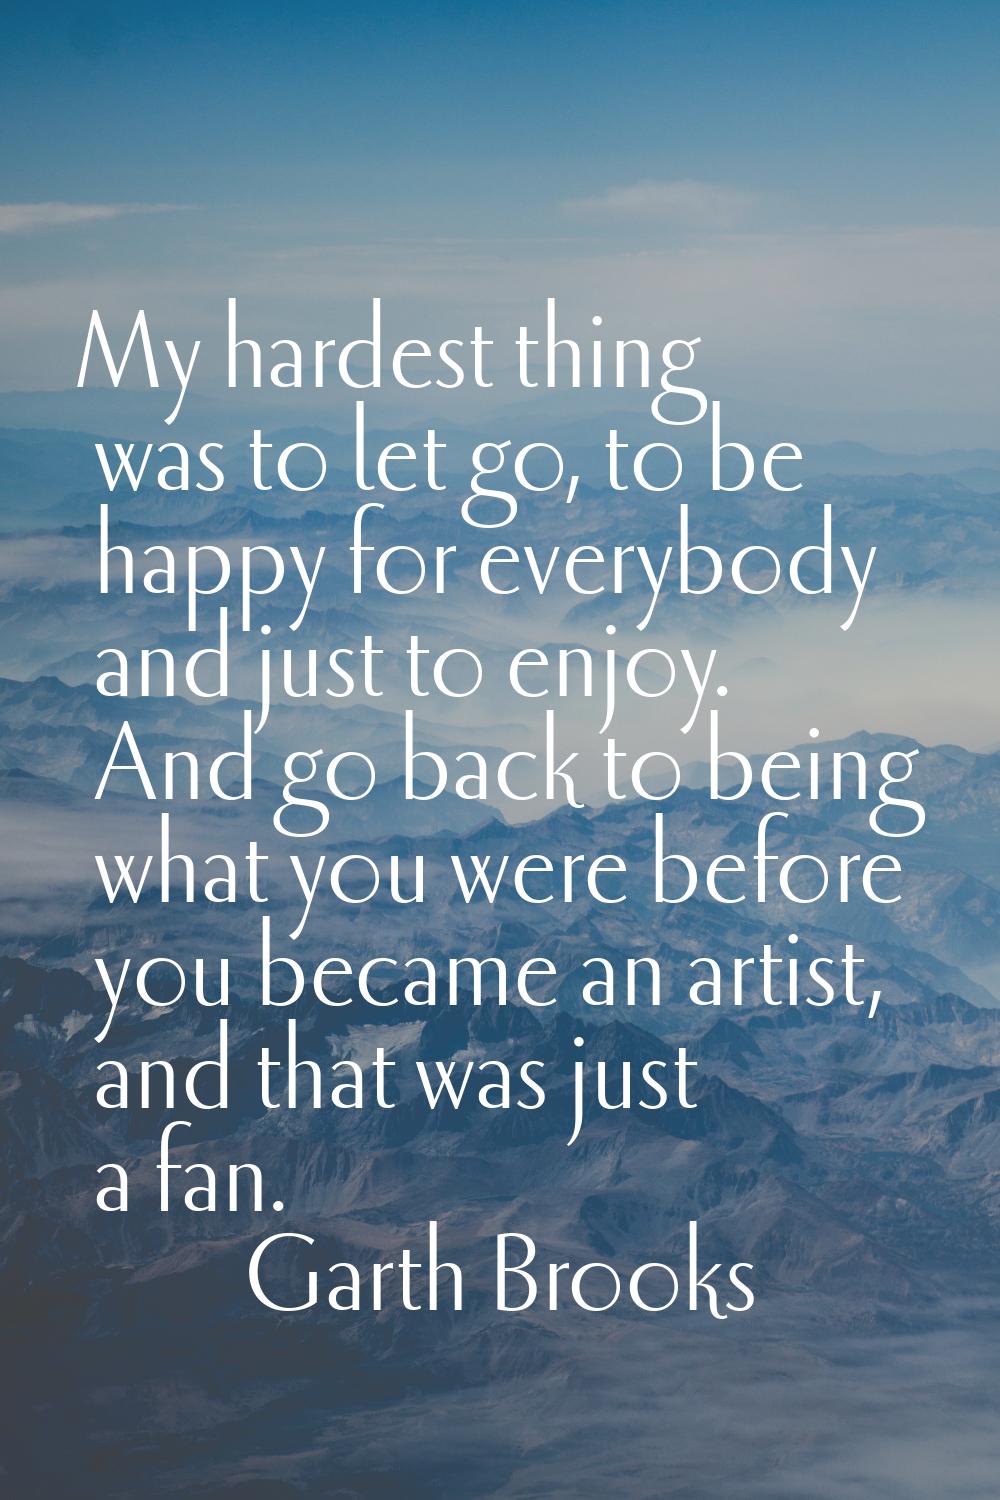 My hardest thing was to let go, to be happy for everybody and just to enjoy. And go back to being w